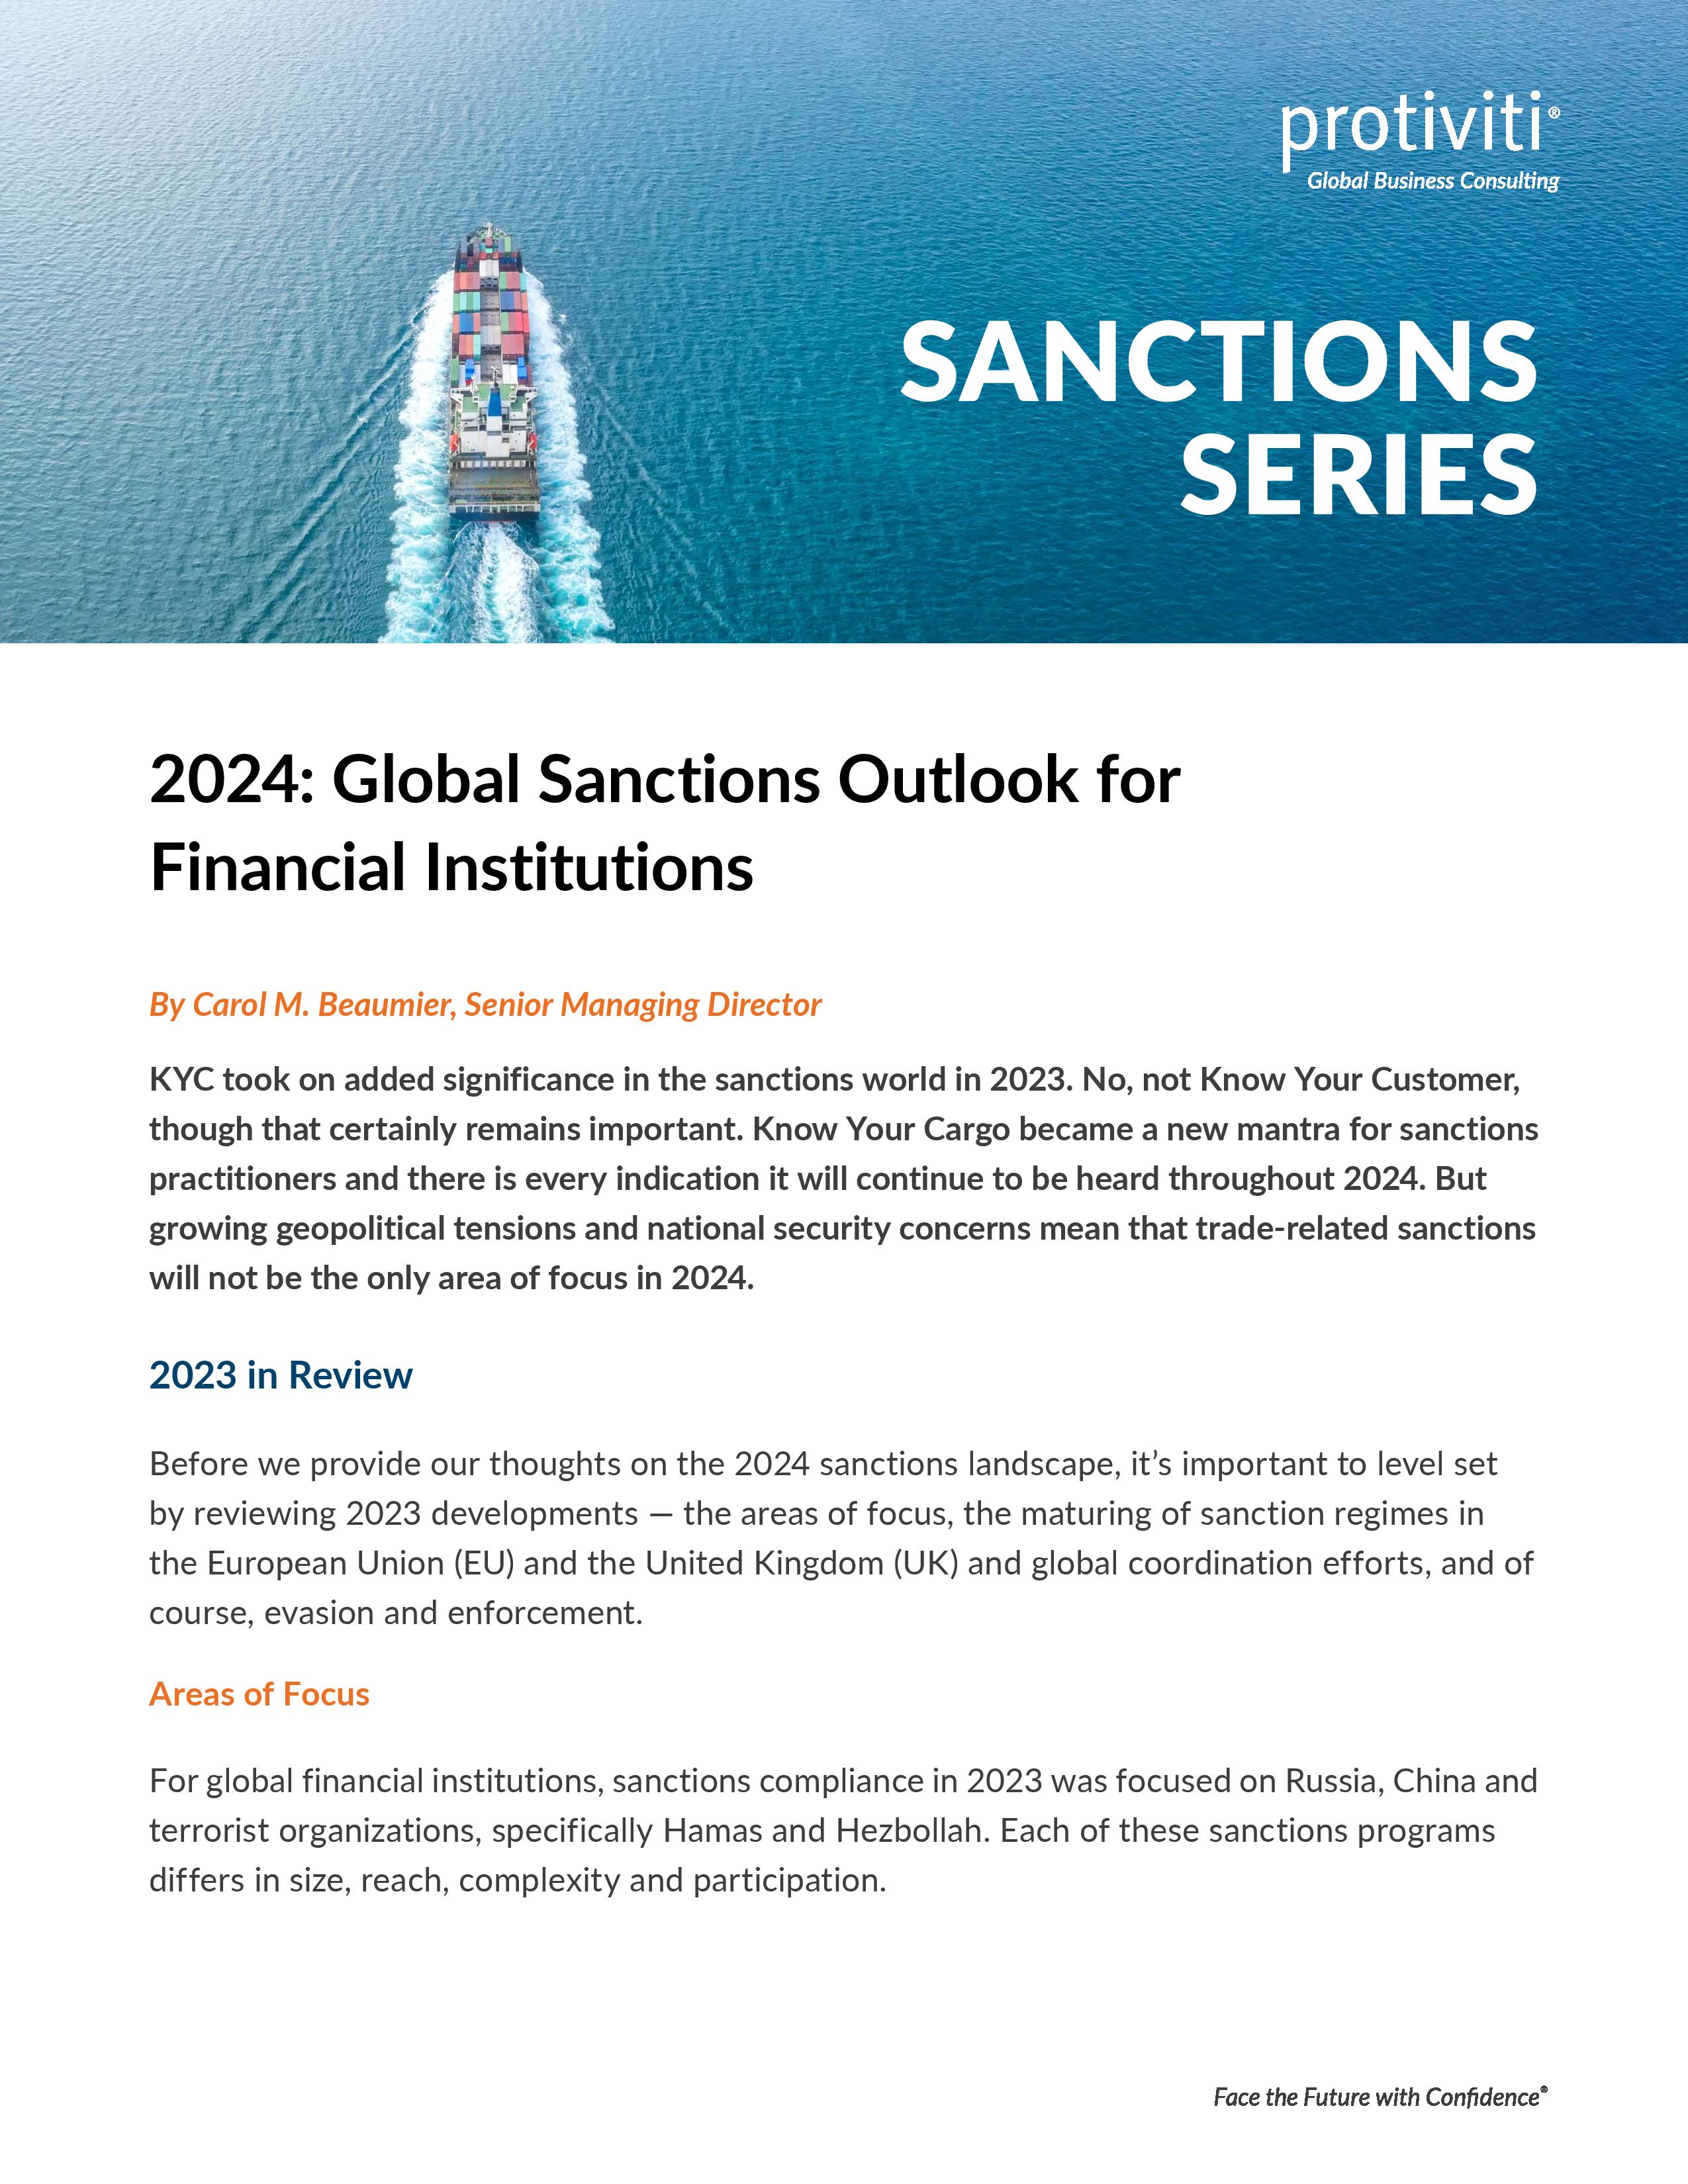 screenshot of the first page of 2024 Global Sanctions Outlook for Financial Institutions